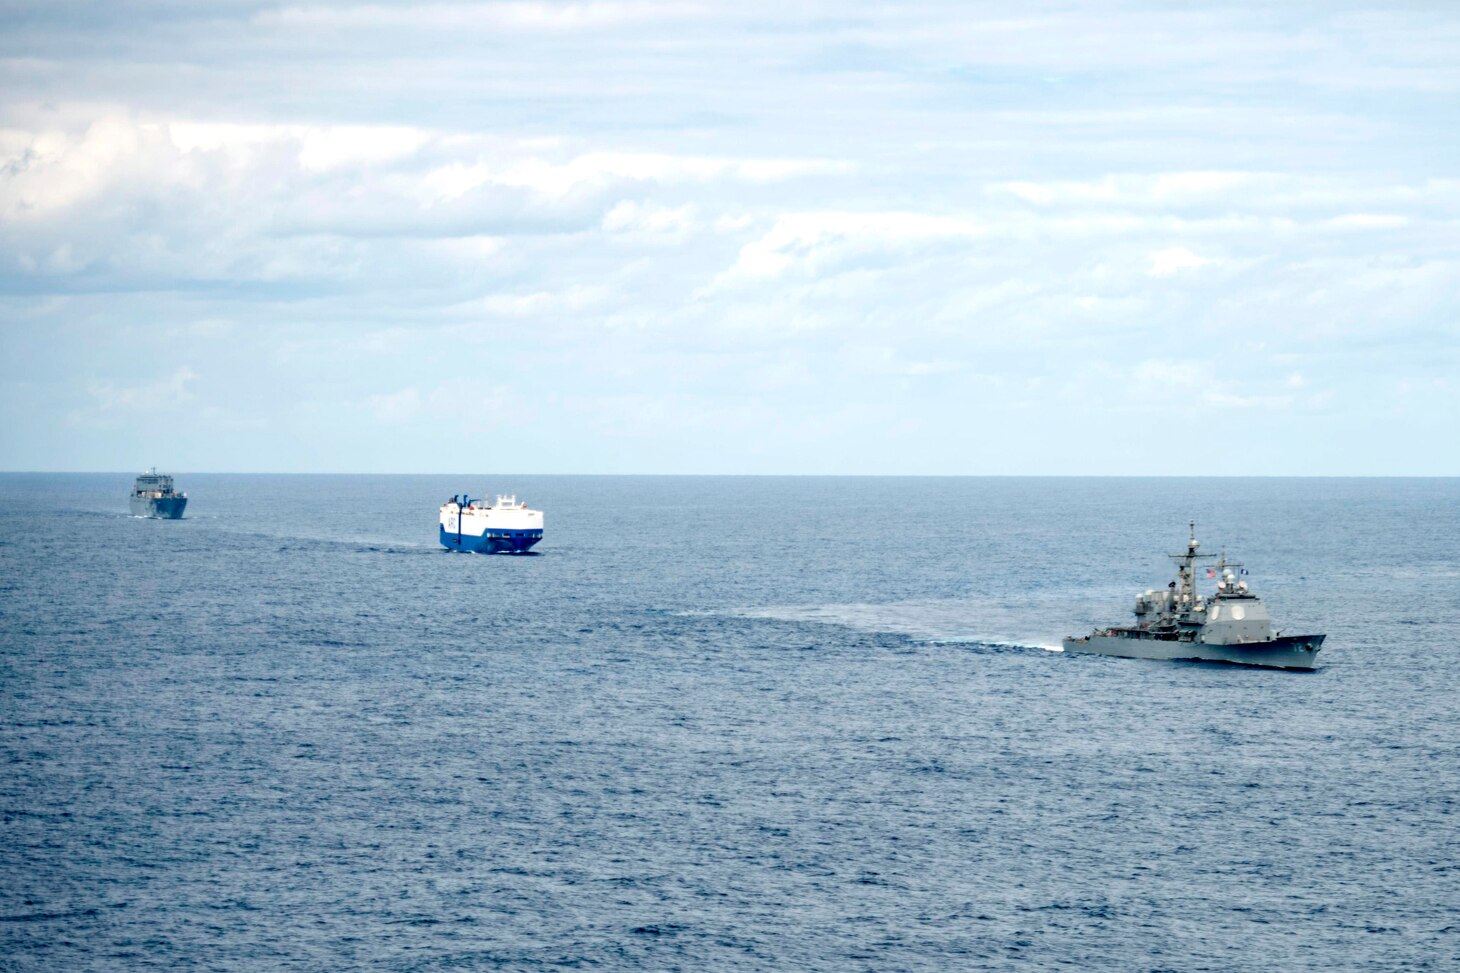 USS Vella Gulf (CG 72), right, the vehicle carrier MV Resolve, center, and the Military Sea Lift Command (MSC) roll-on roll-off cargo ship USNS Benavidez (T-AKR 306) steam in formation